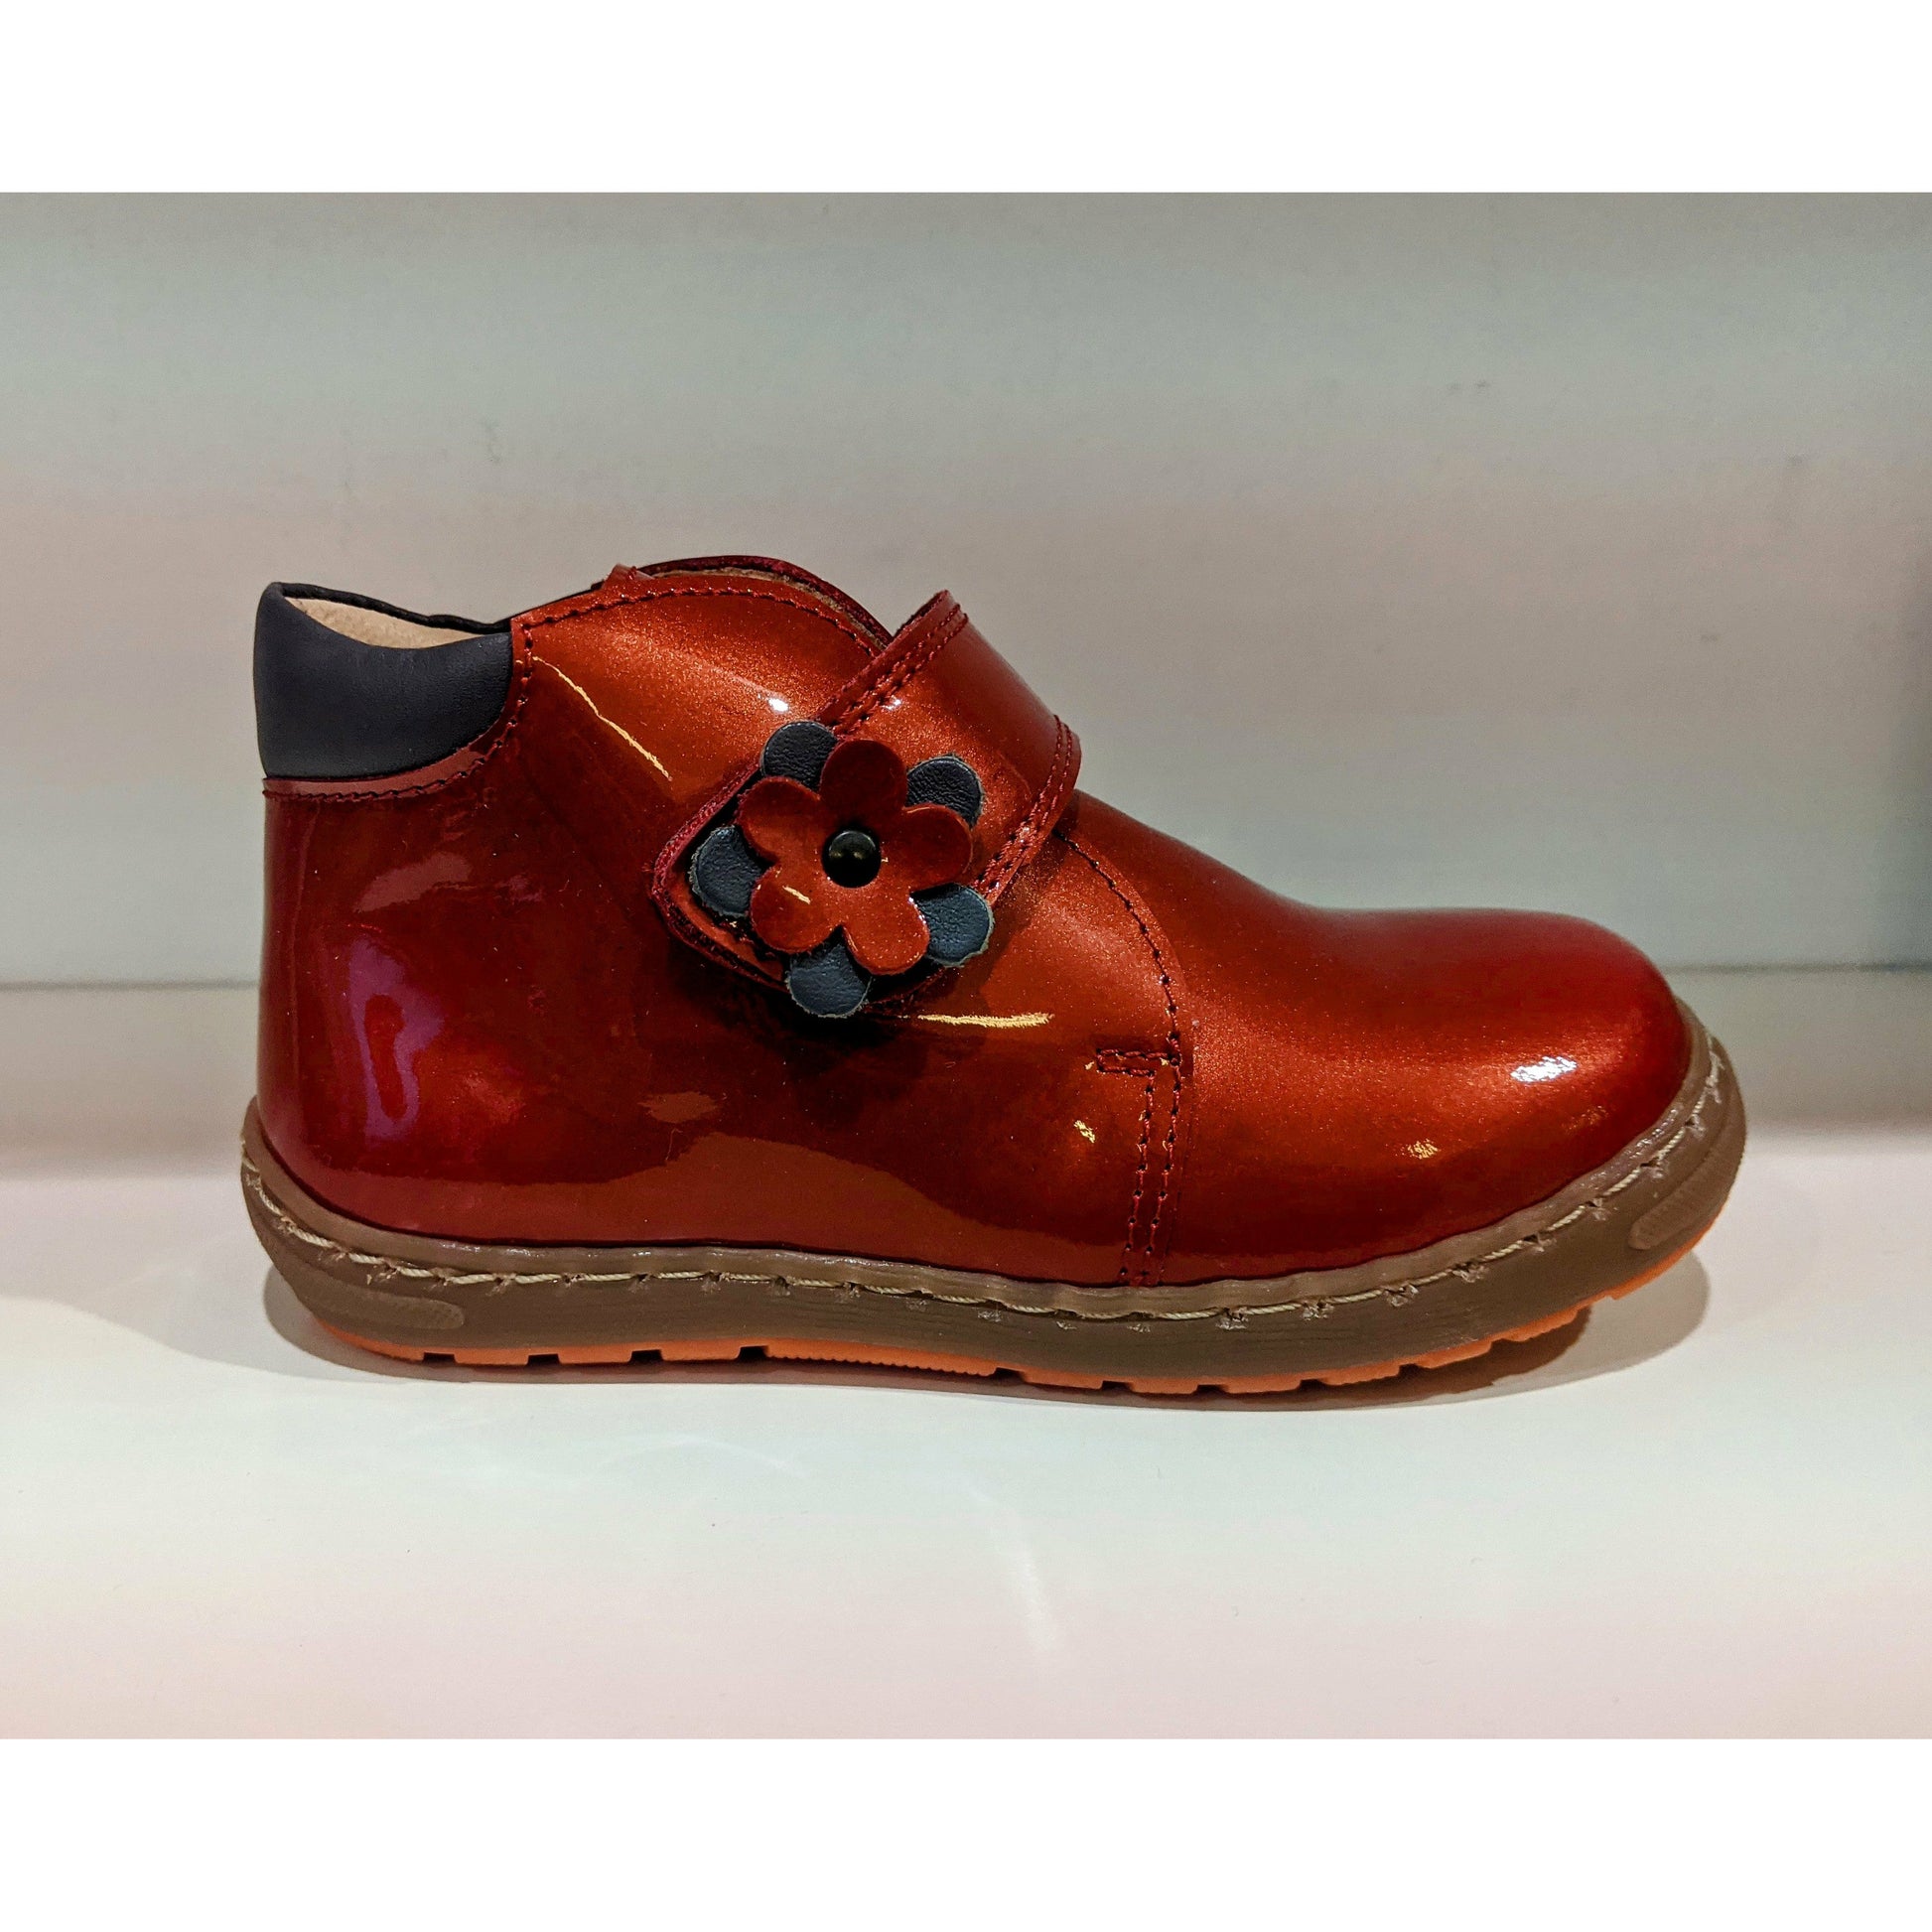 A girls ankle boot by Petasil, style Denise, in Red patent with velcro fastening. Right side view